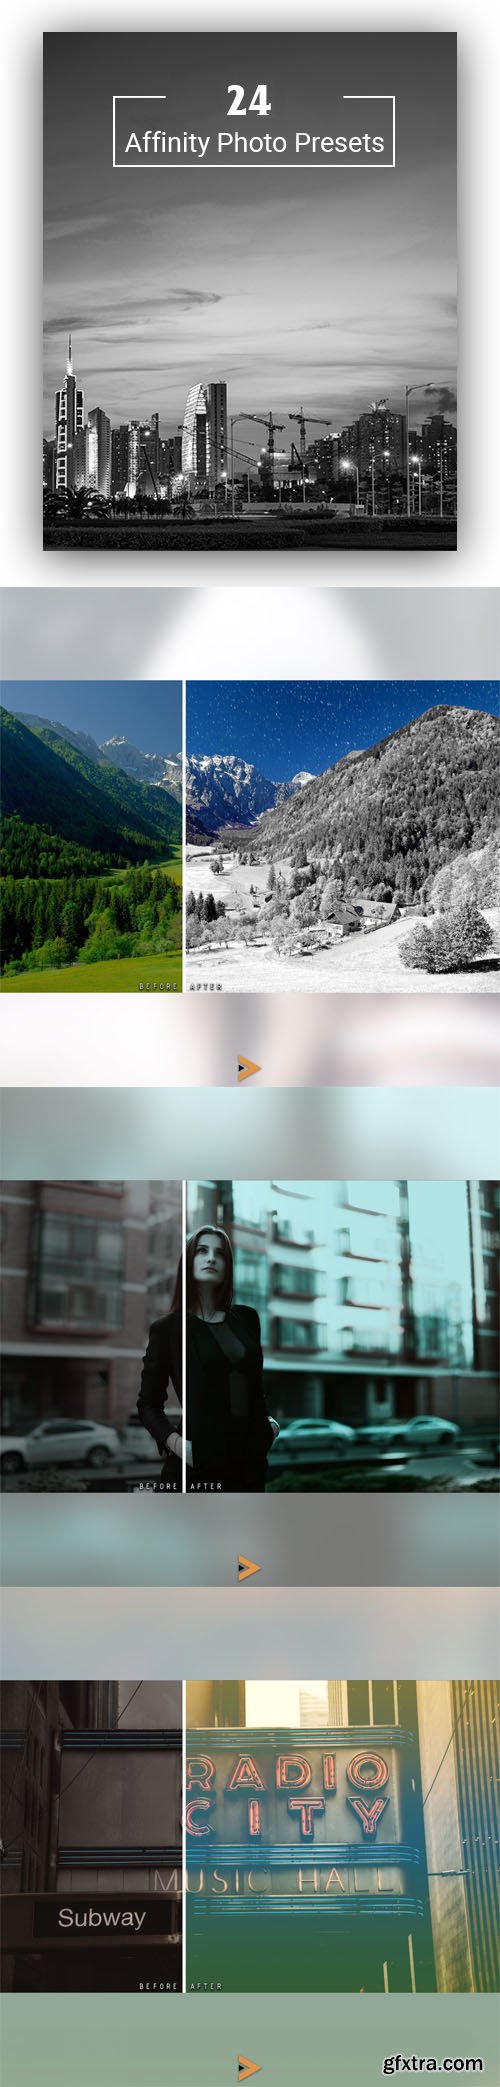 24 Affinity Photo Presets with 5 Categories